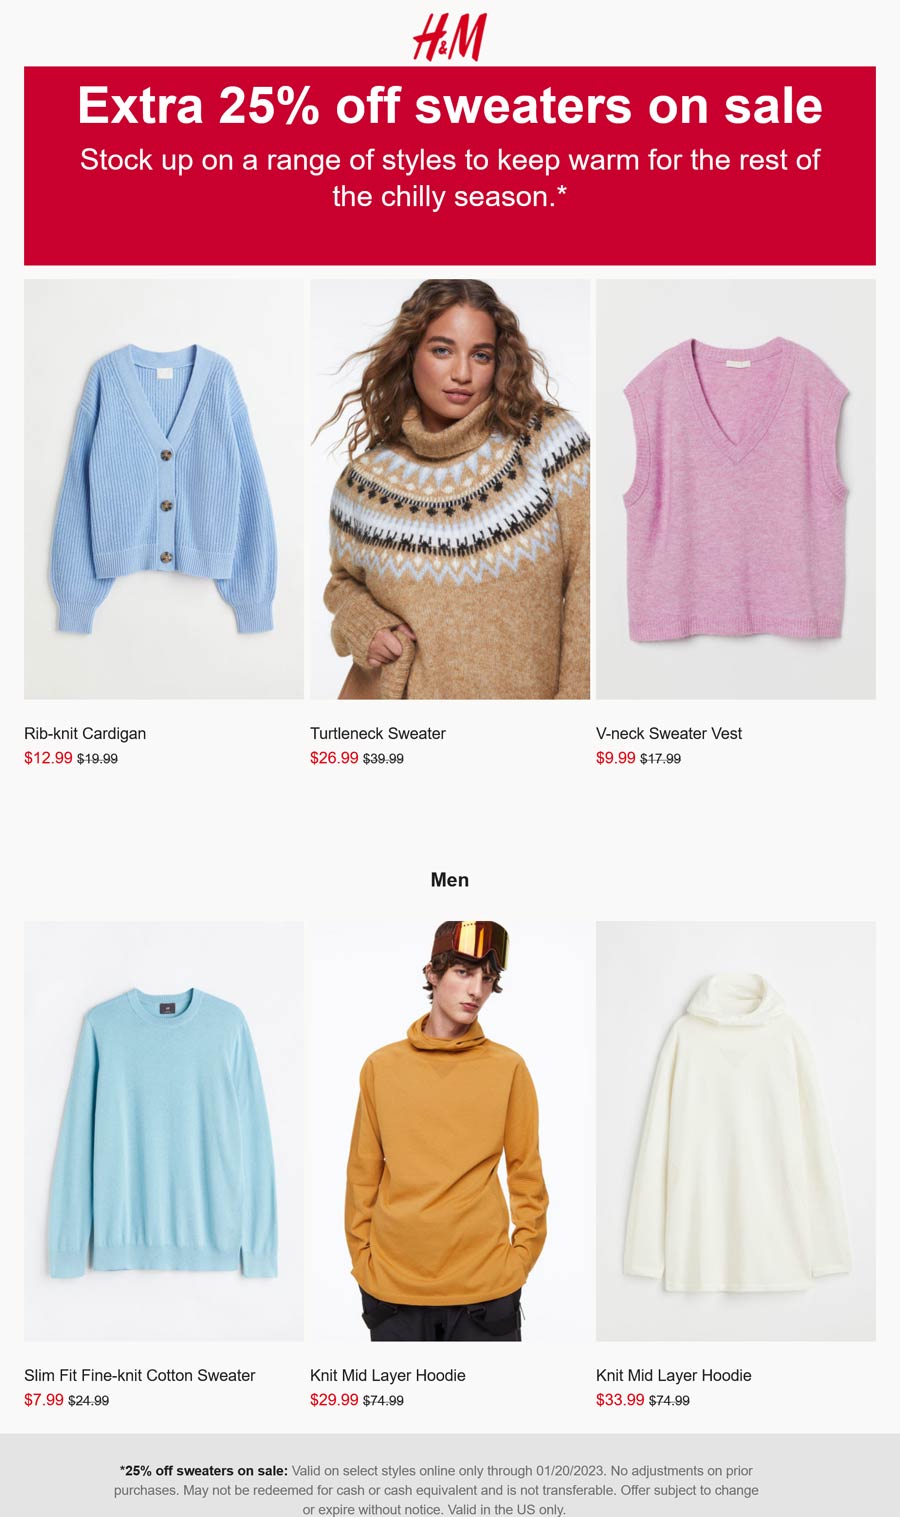 H&M stores Coupon  Extra 25% off sale sweaters at H&M #hm 